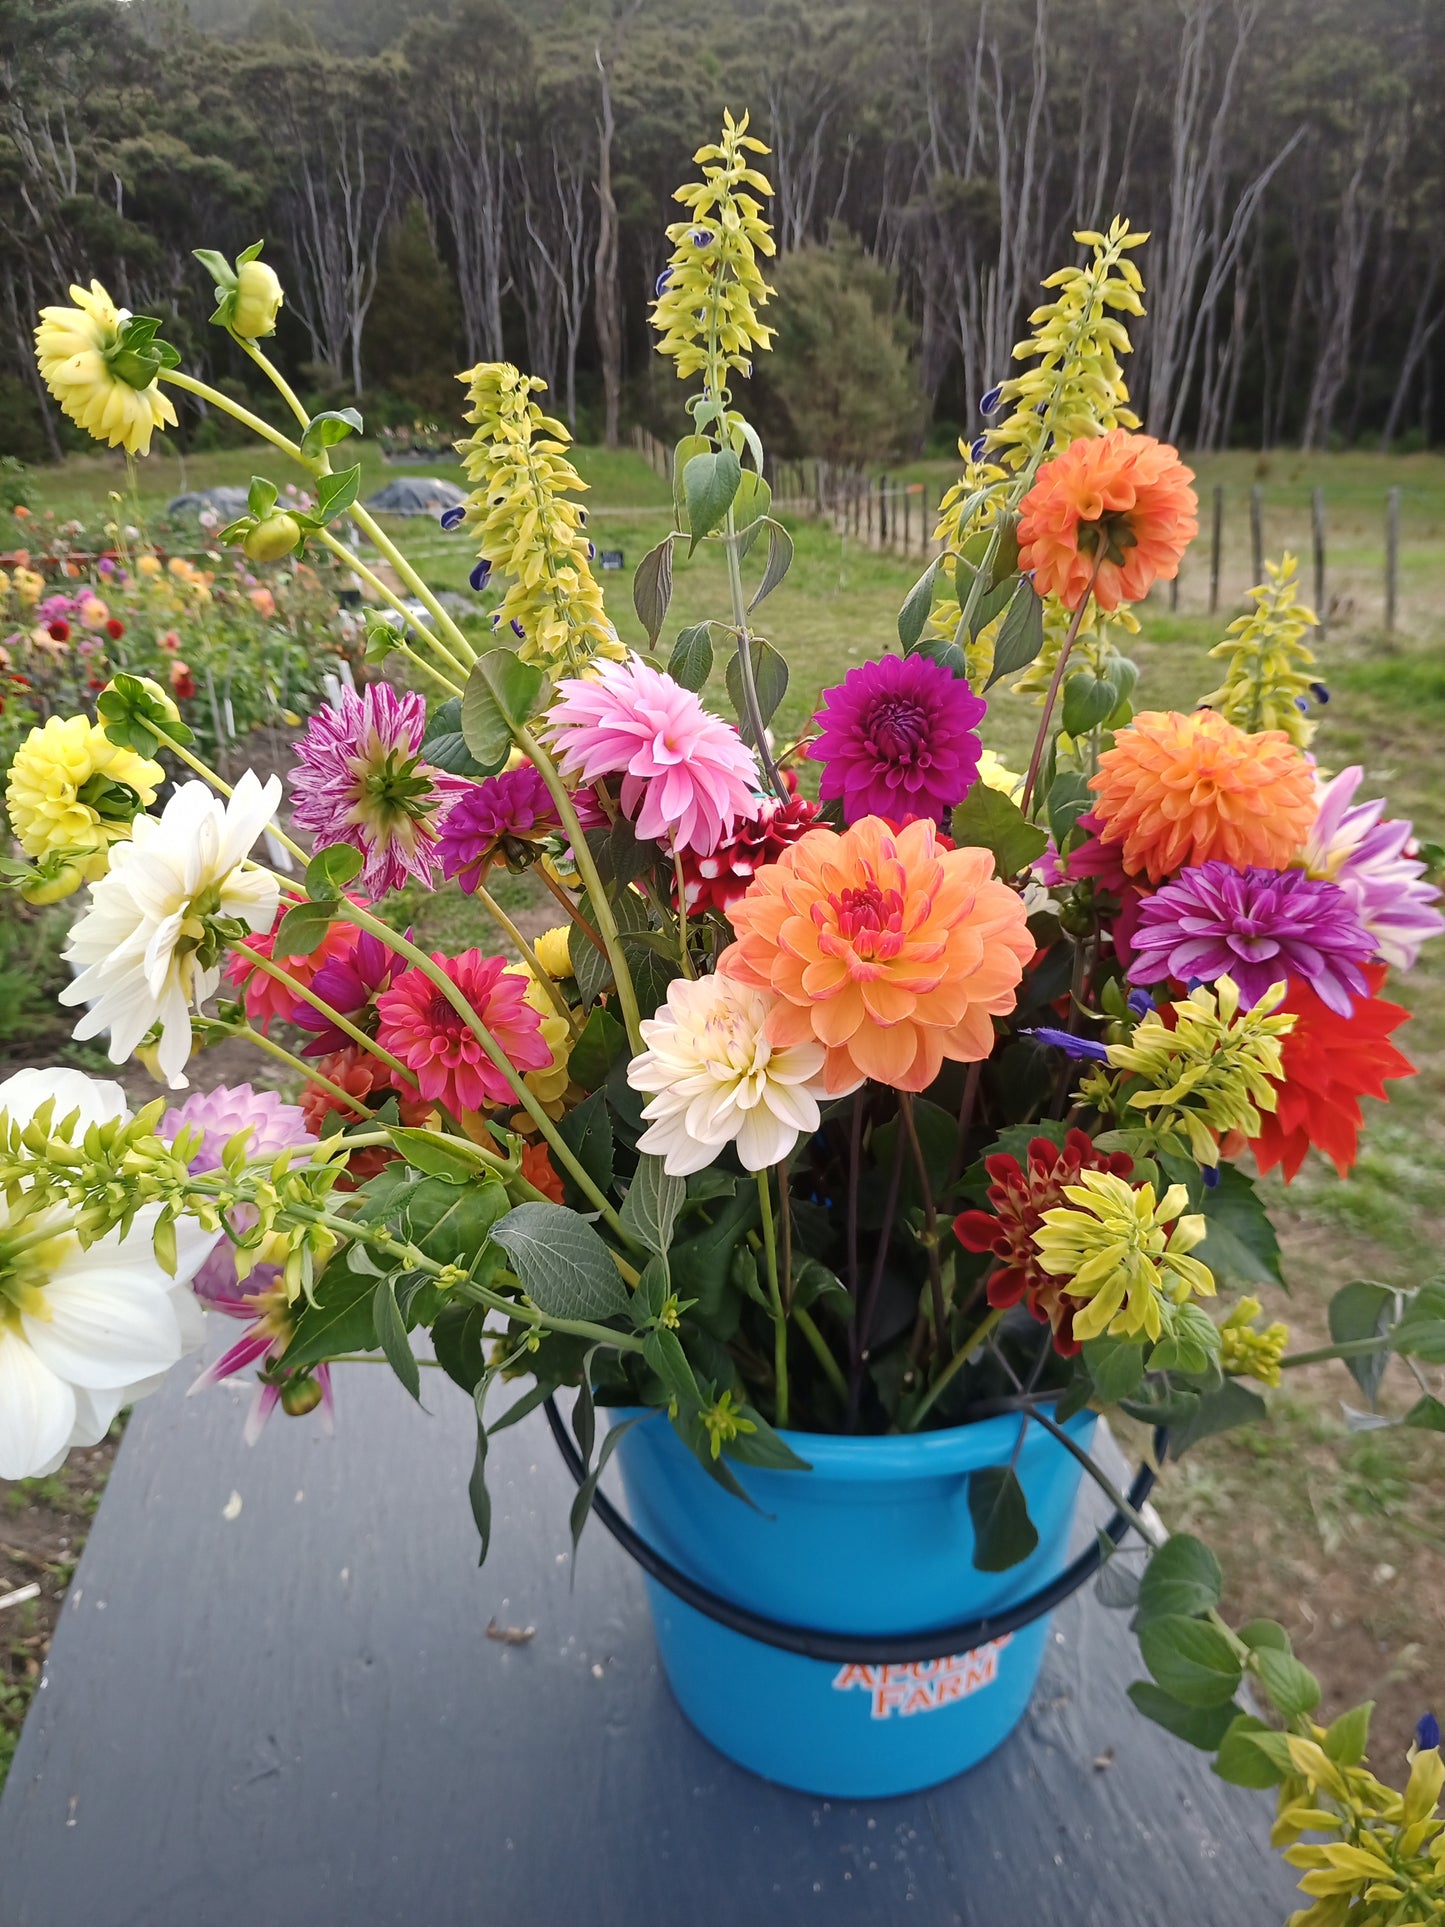 PYO Flowers: Tuesday April 16th 4-6pm